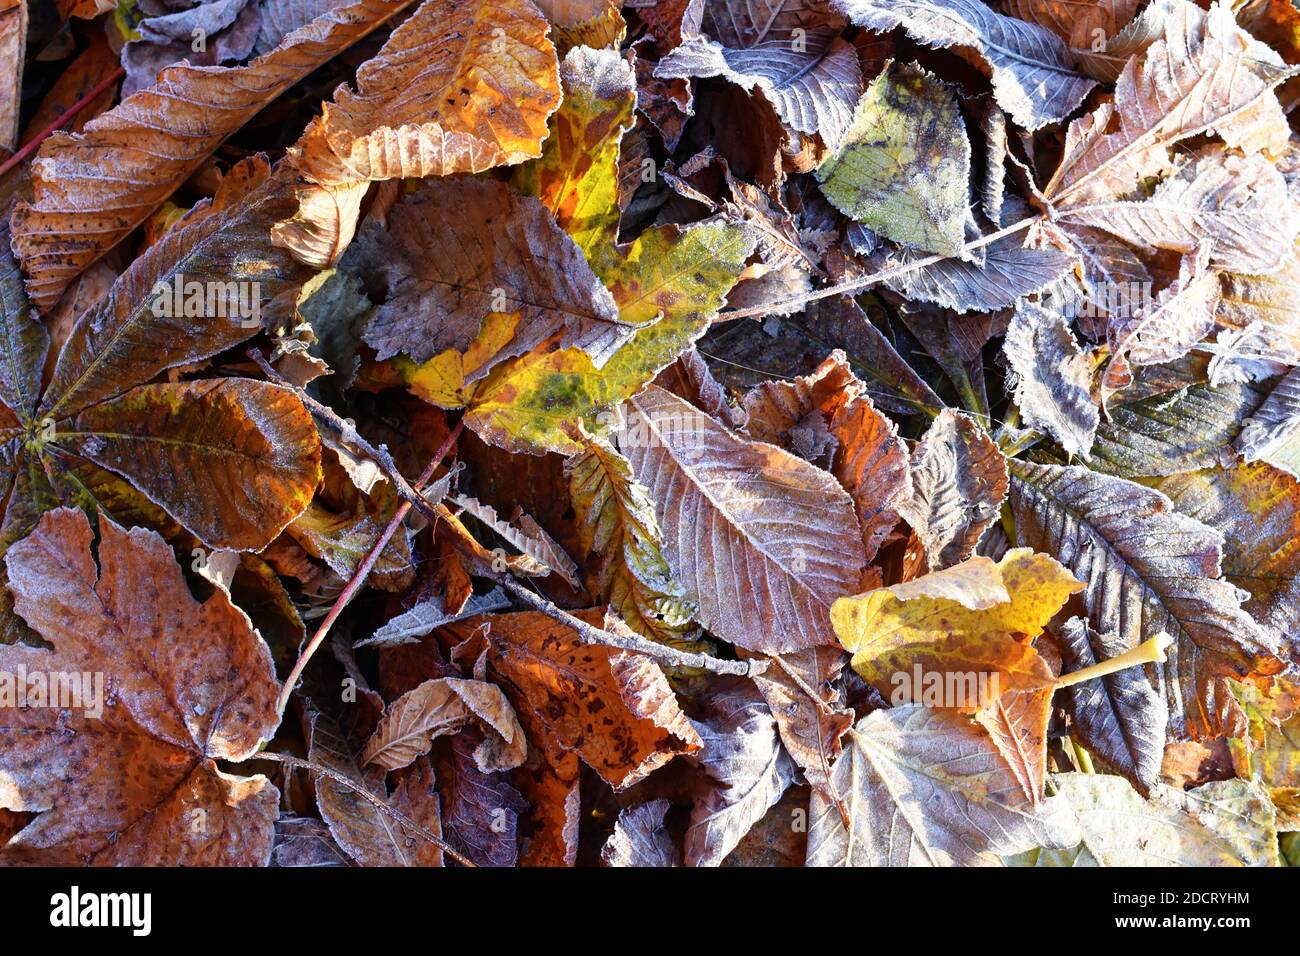 Different autumn colored fallen leaves laying on the ground Stock Photo